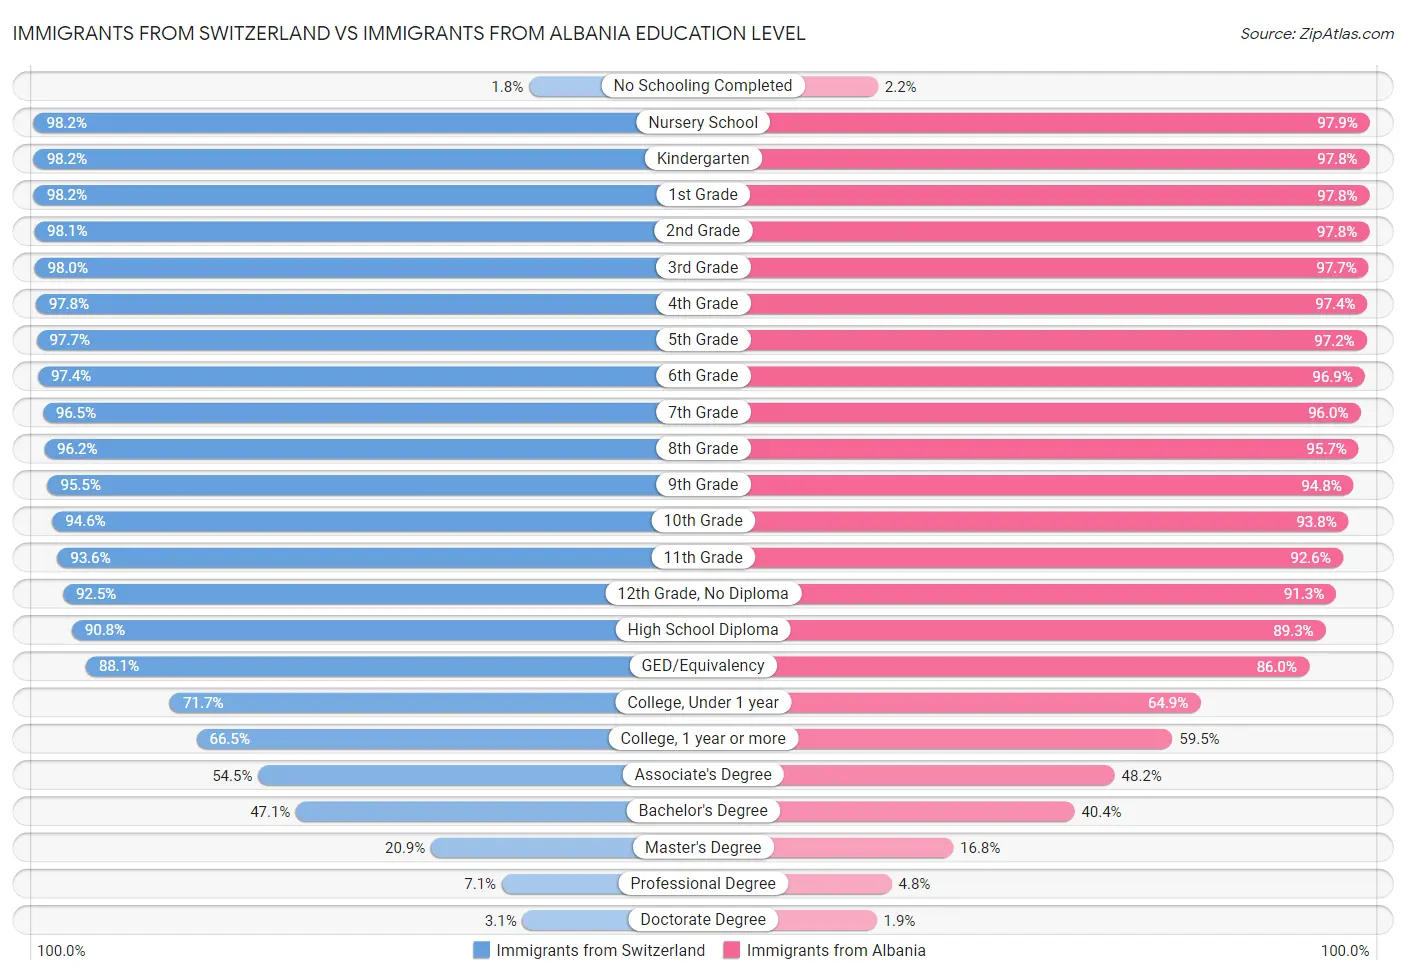 Immigrants from Switzerland vs Immigrants from Albania Education Level